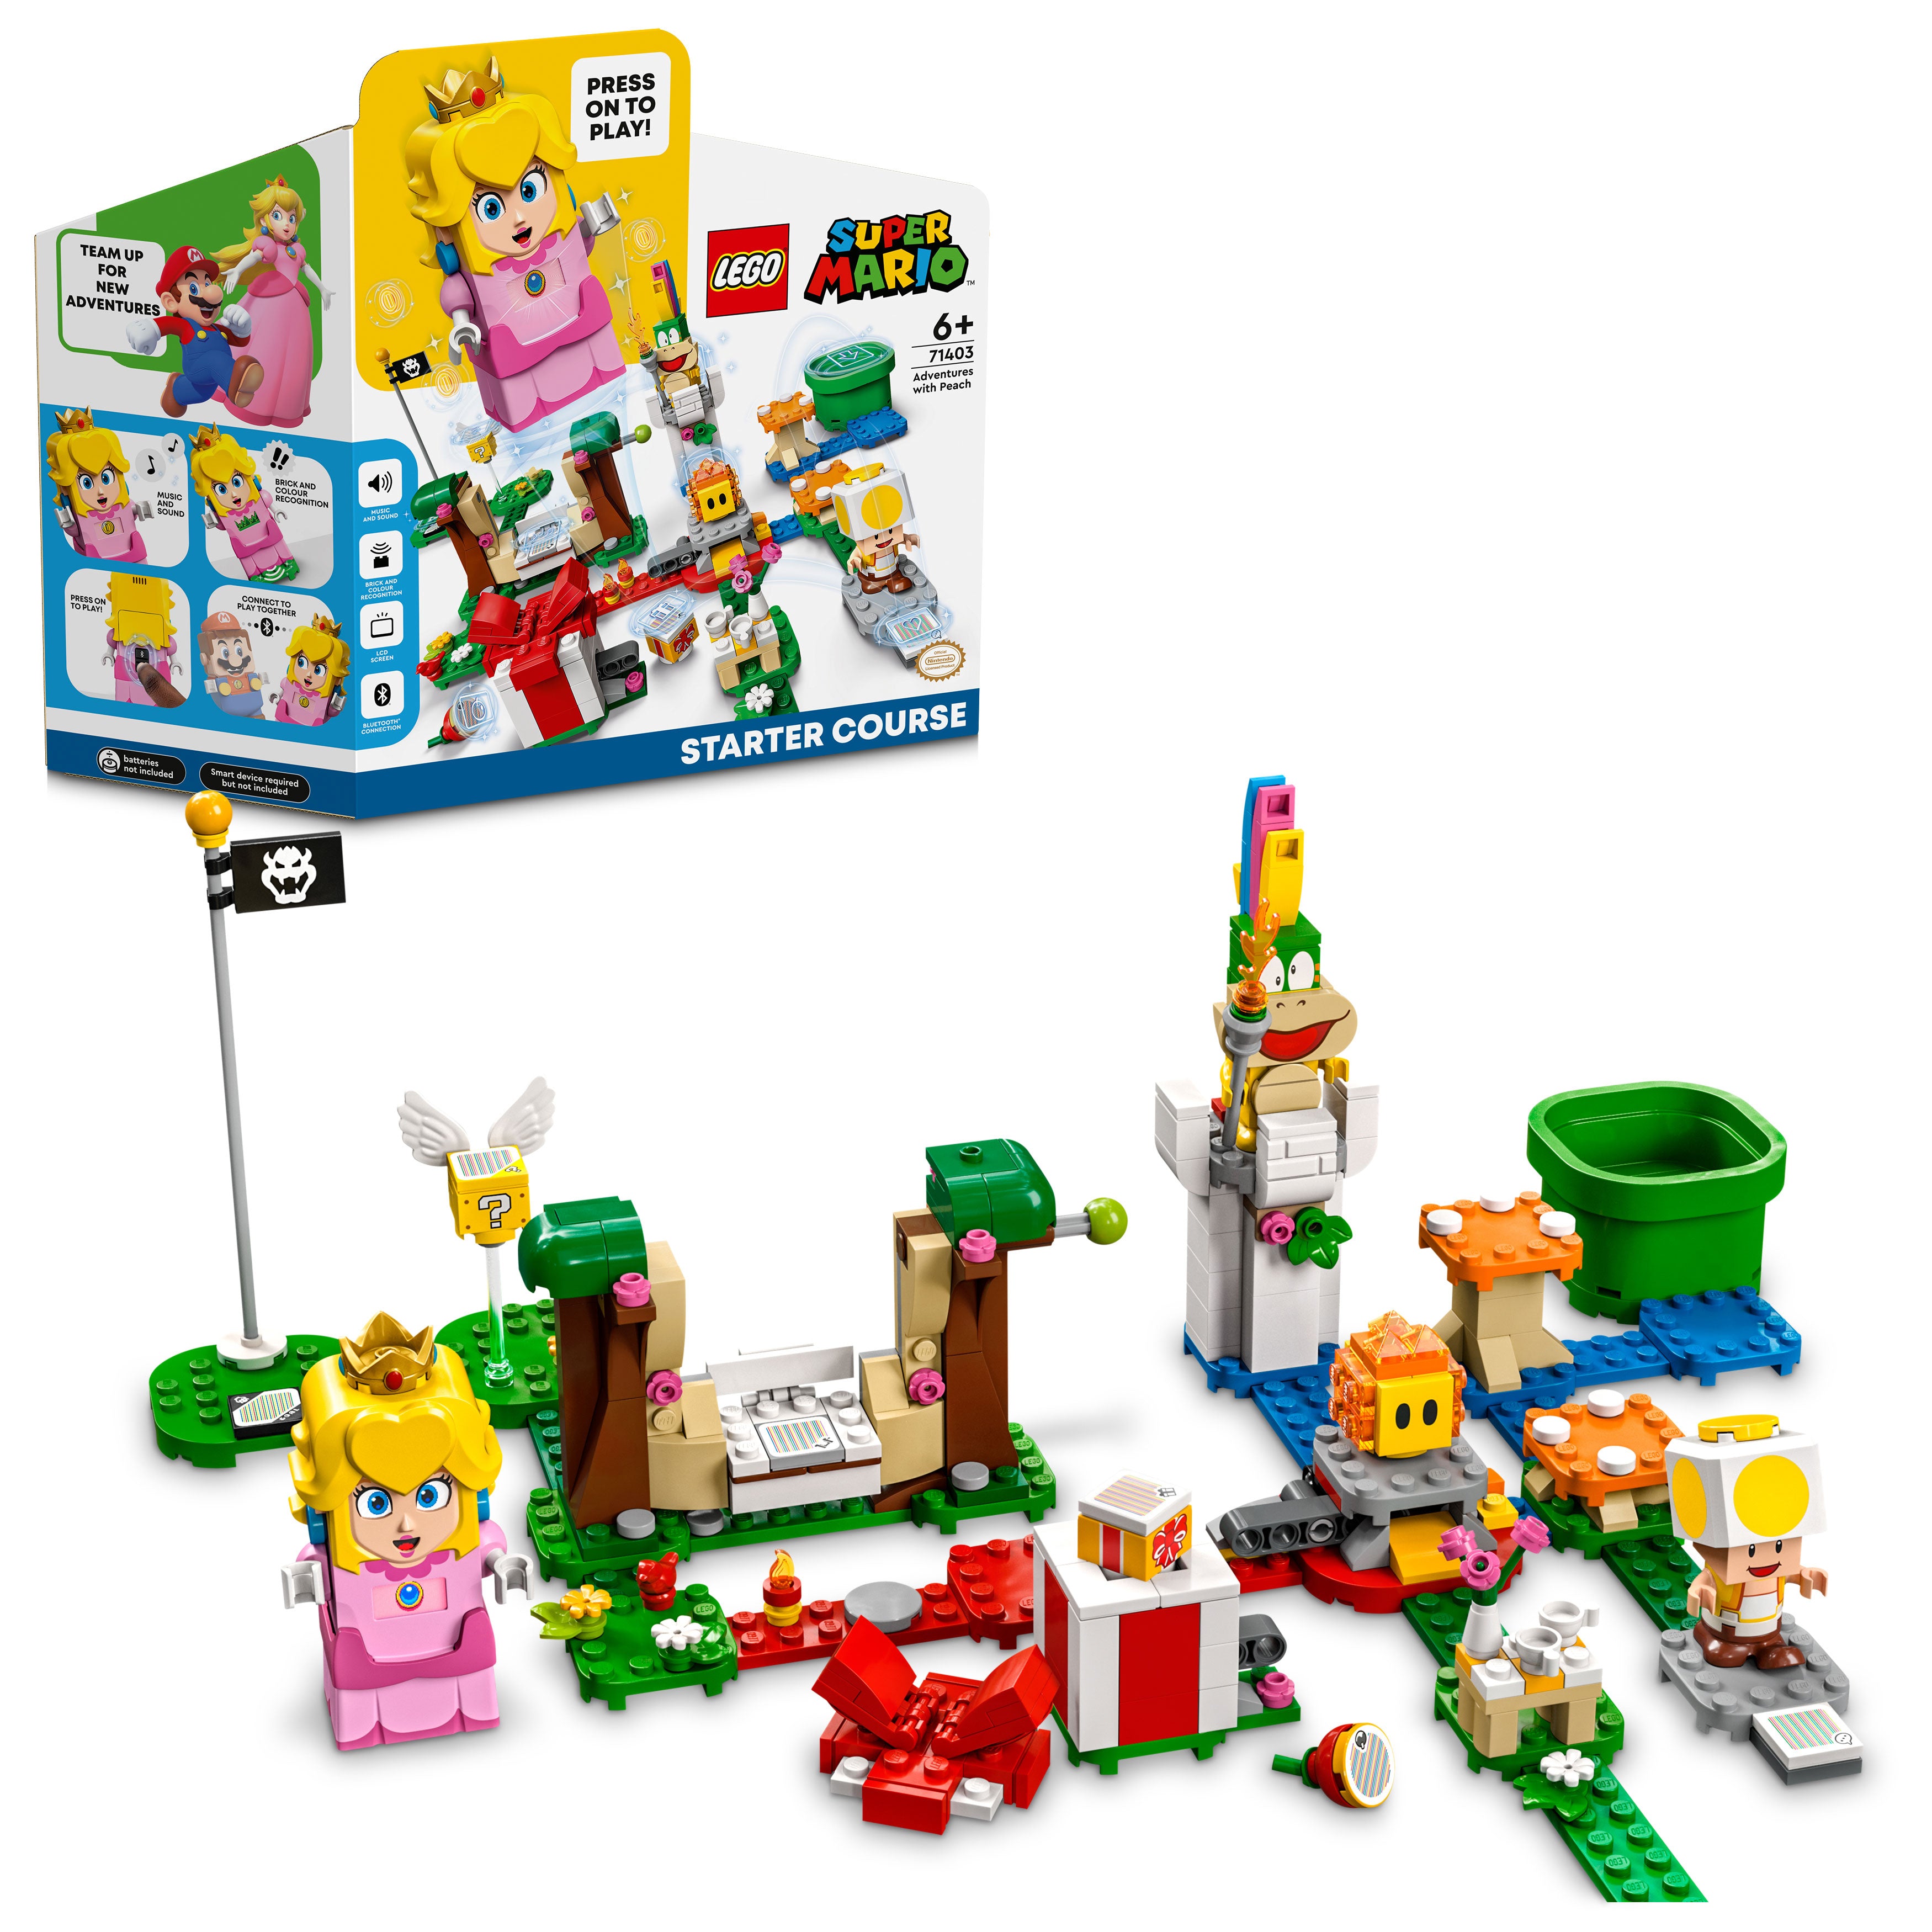 Lego 71403 Adventures with Peach Starter Course